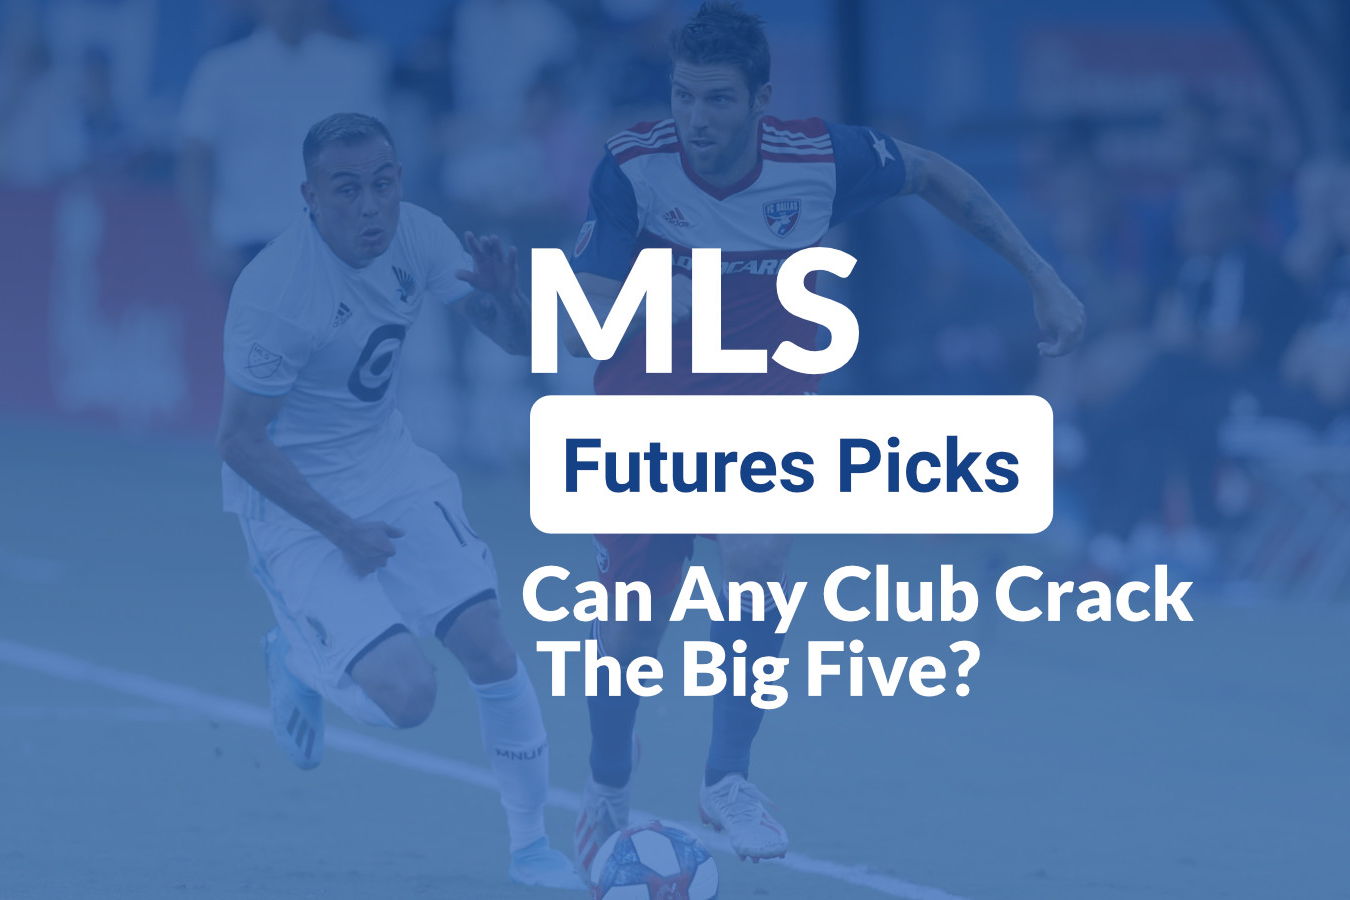 MLS Futures: Can Any Club Crack The Big Five?